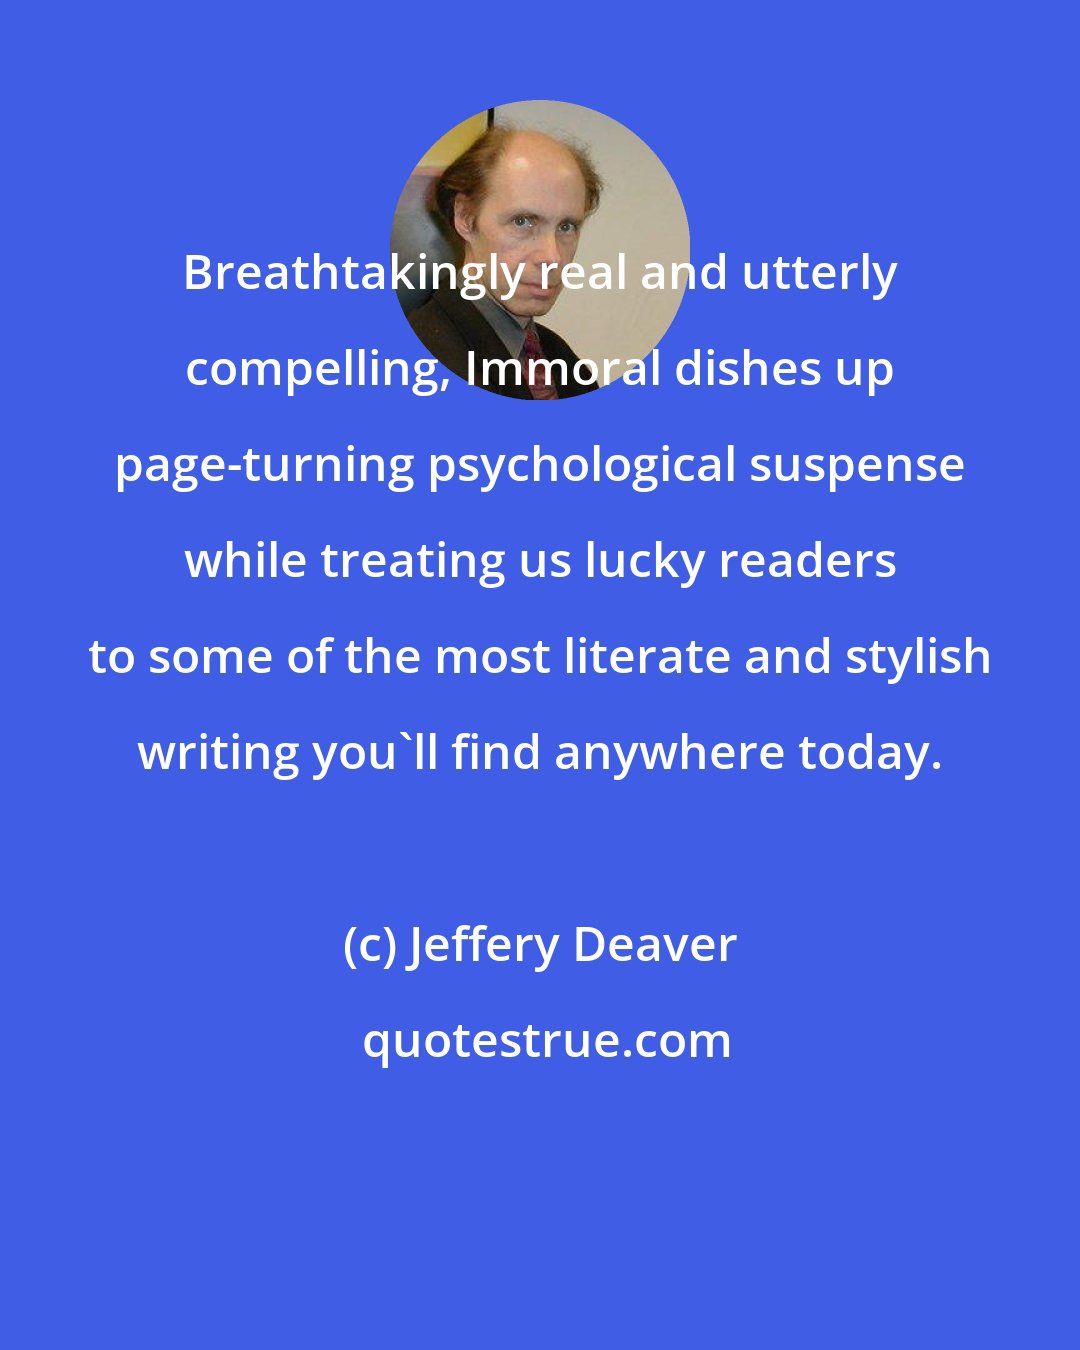 Jeffery Deaver: Breathtakingly real and utterly compelling, Immoral dishes up page-turning psychological suspense while treating us lucky readers to some of the most literate and stylish writing you'll find anywhere today.